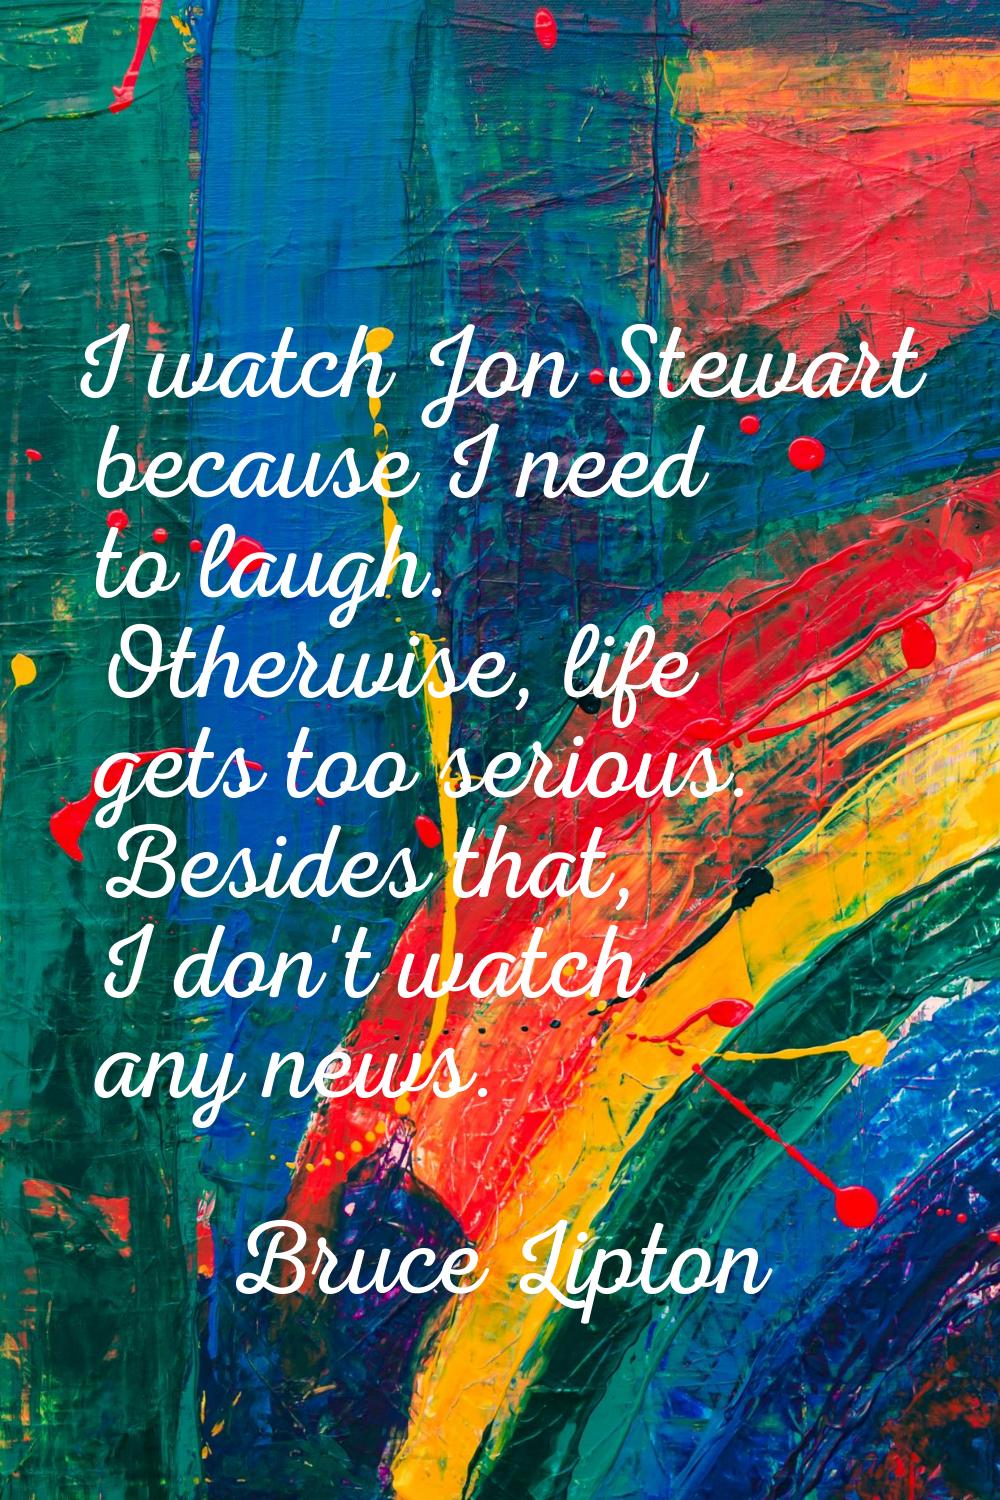 I watch Jon Stewart because I need to laugh. Otherwise, life gets too serious. Besides that, I don'